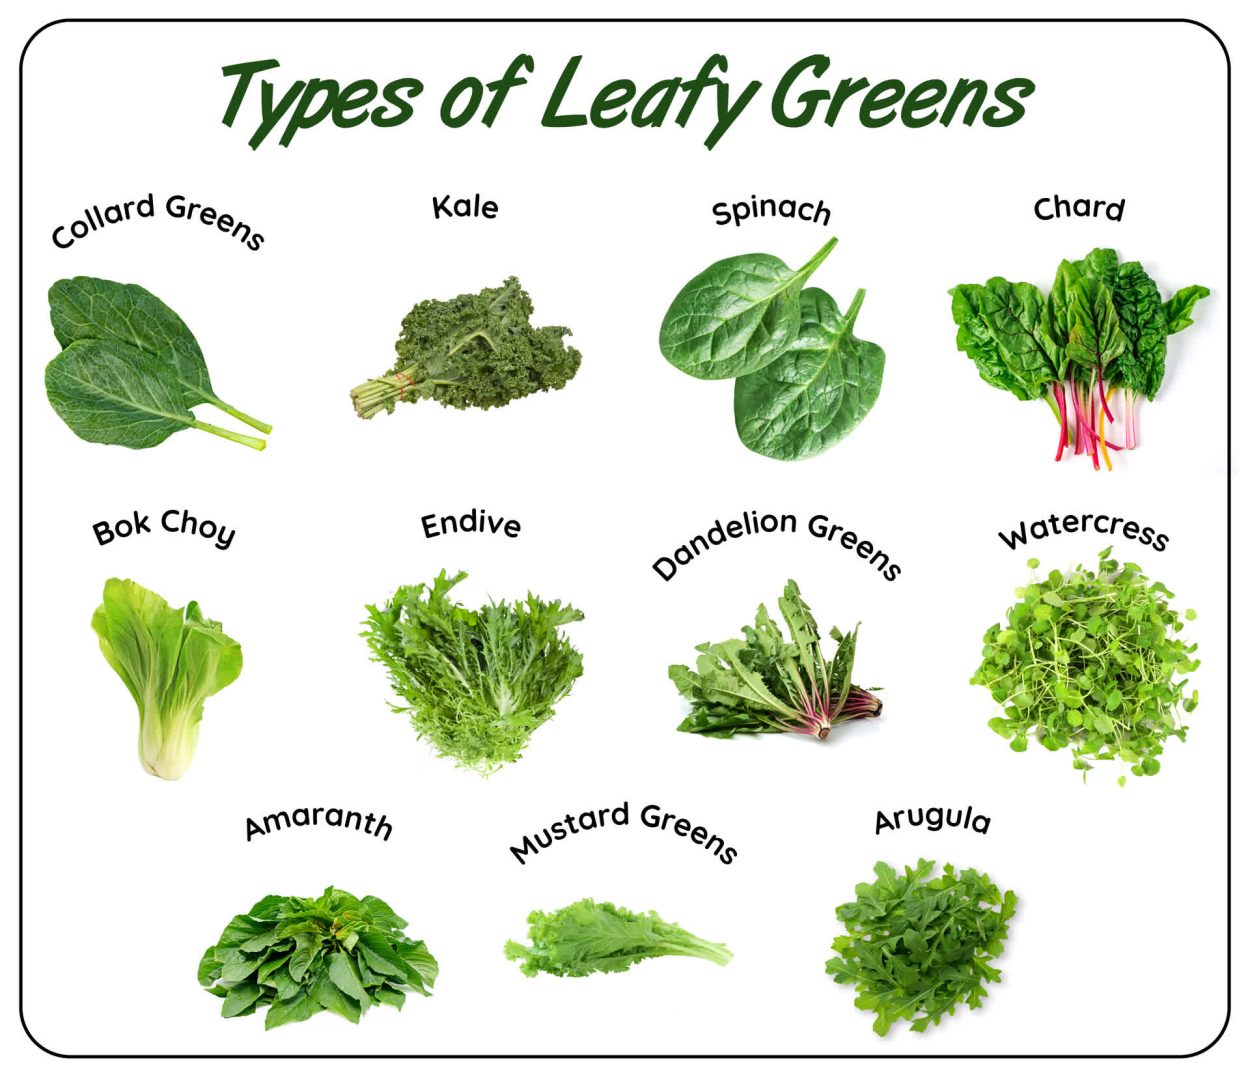 A graphic showing pictures of leafy greens as mentioned in previous paragraph.